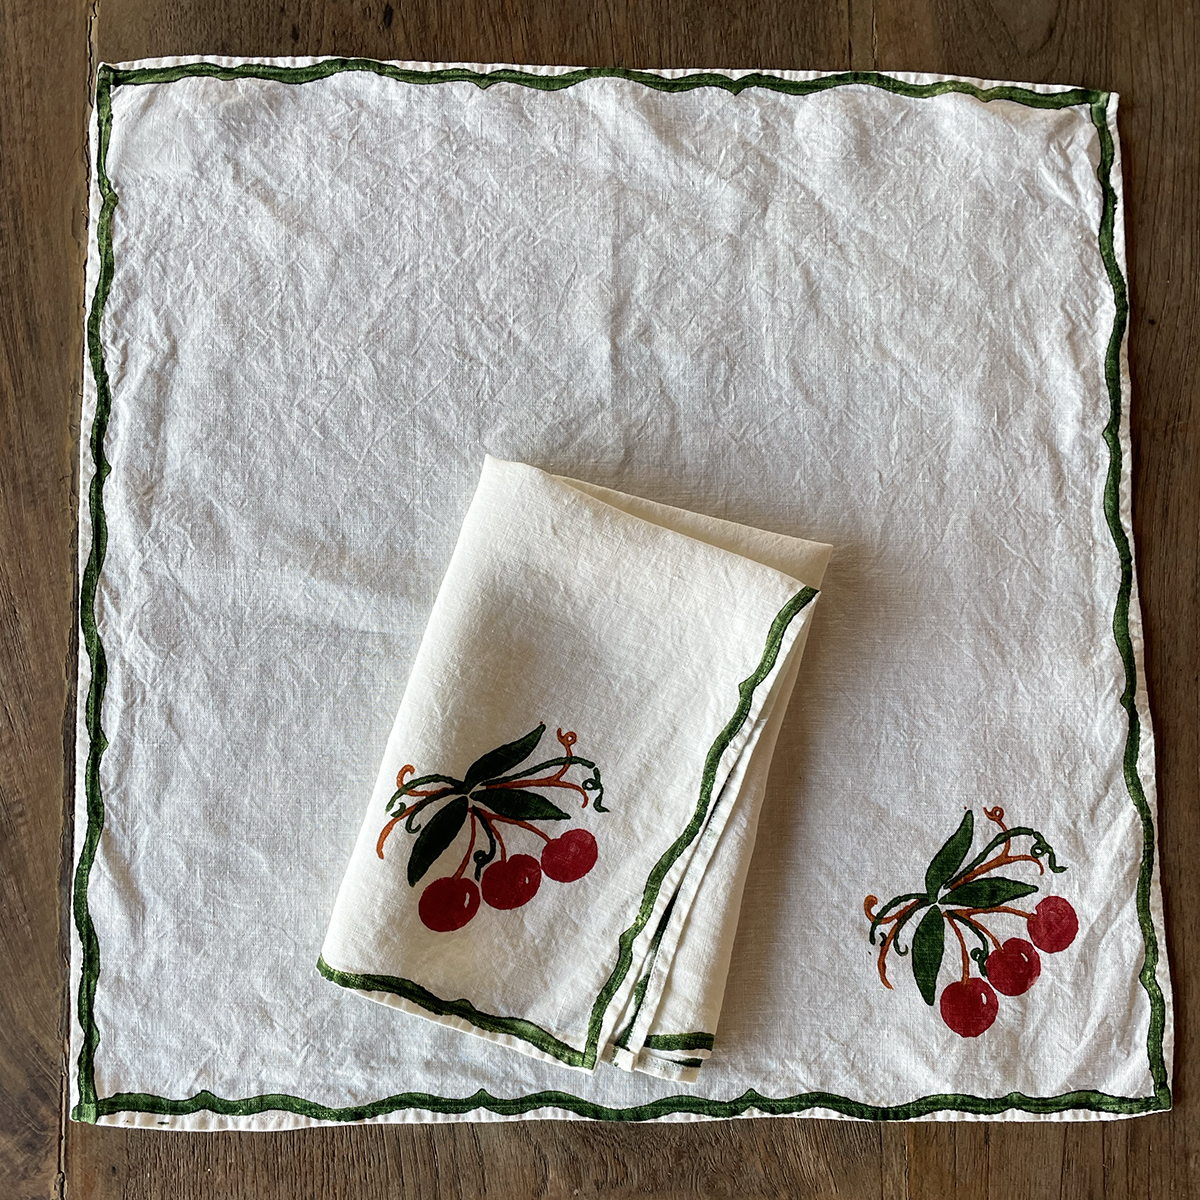 A Set of Pure White Linen Napkins With Embroidery / Christmas